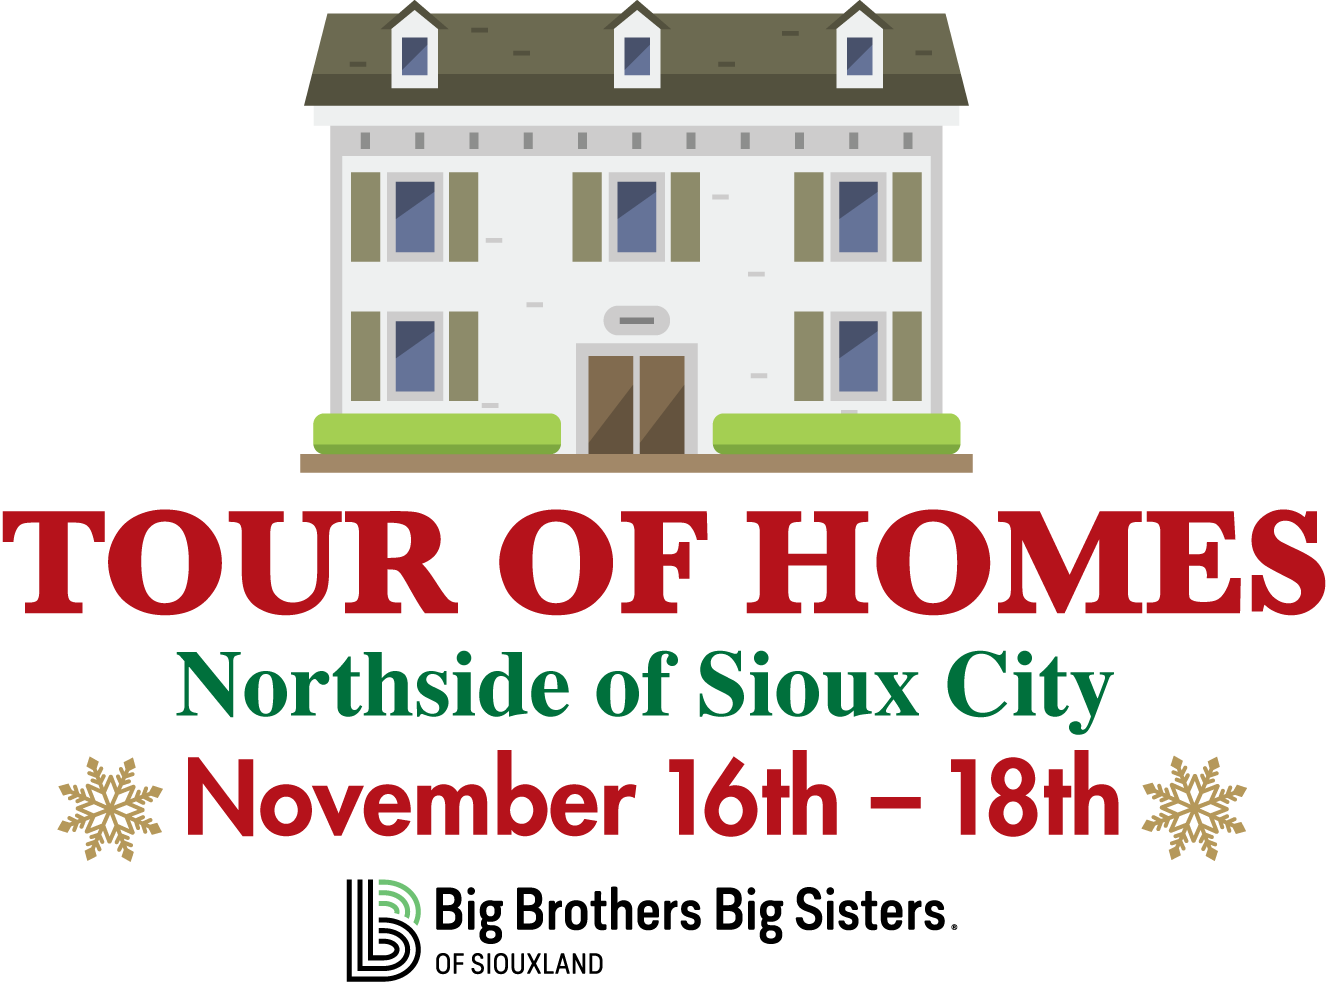 sioux center health tour of homes